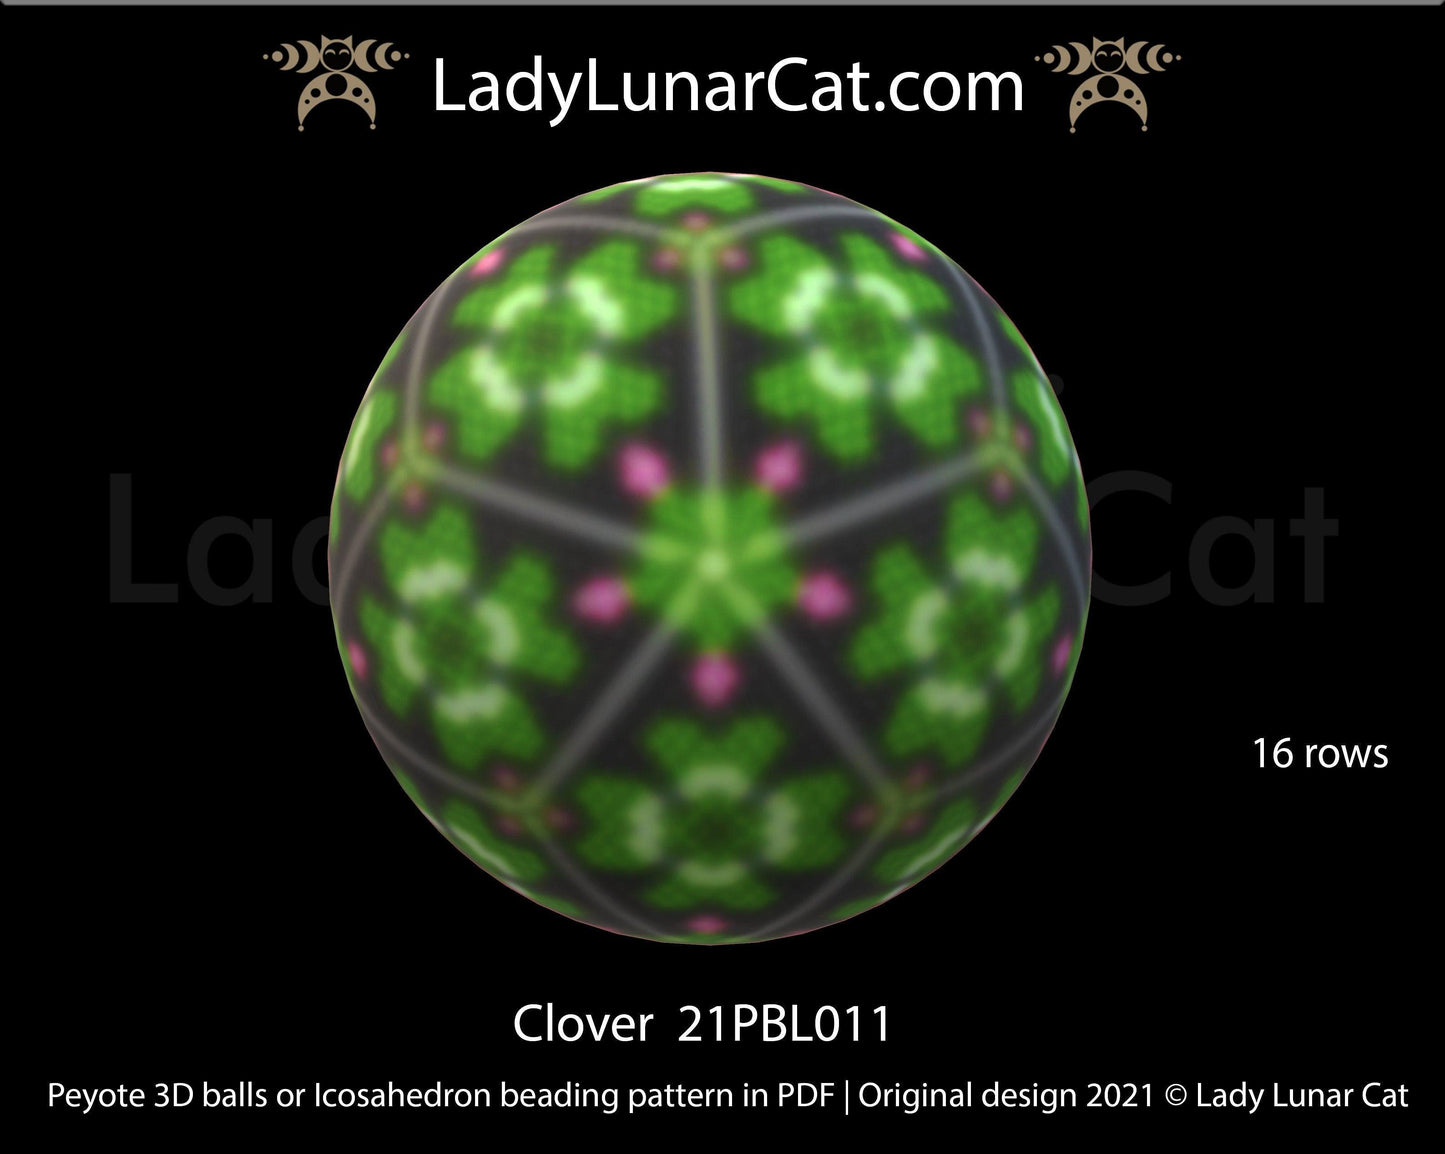 Peyote 3d ball pattern for beading | Beaded Icosahedron Clover  21PBL011 16 rows LadyLunarCat